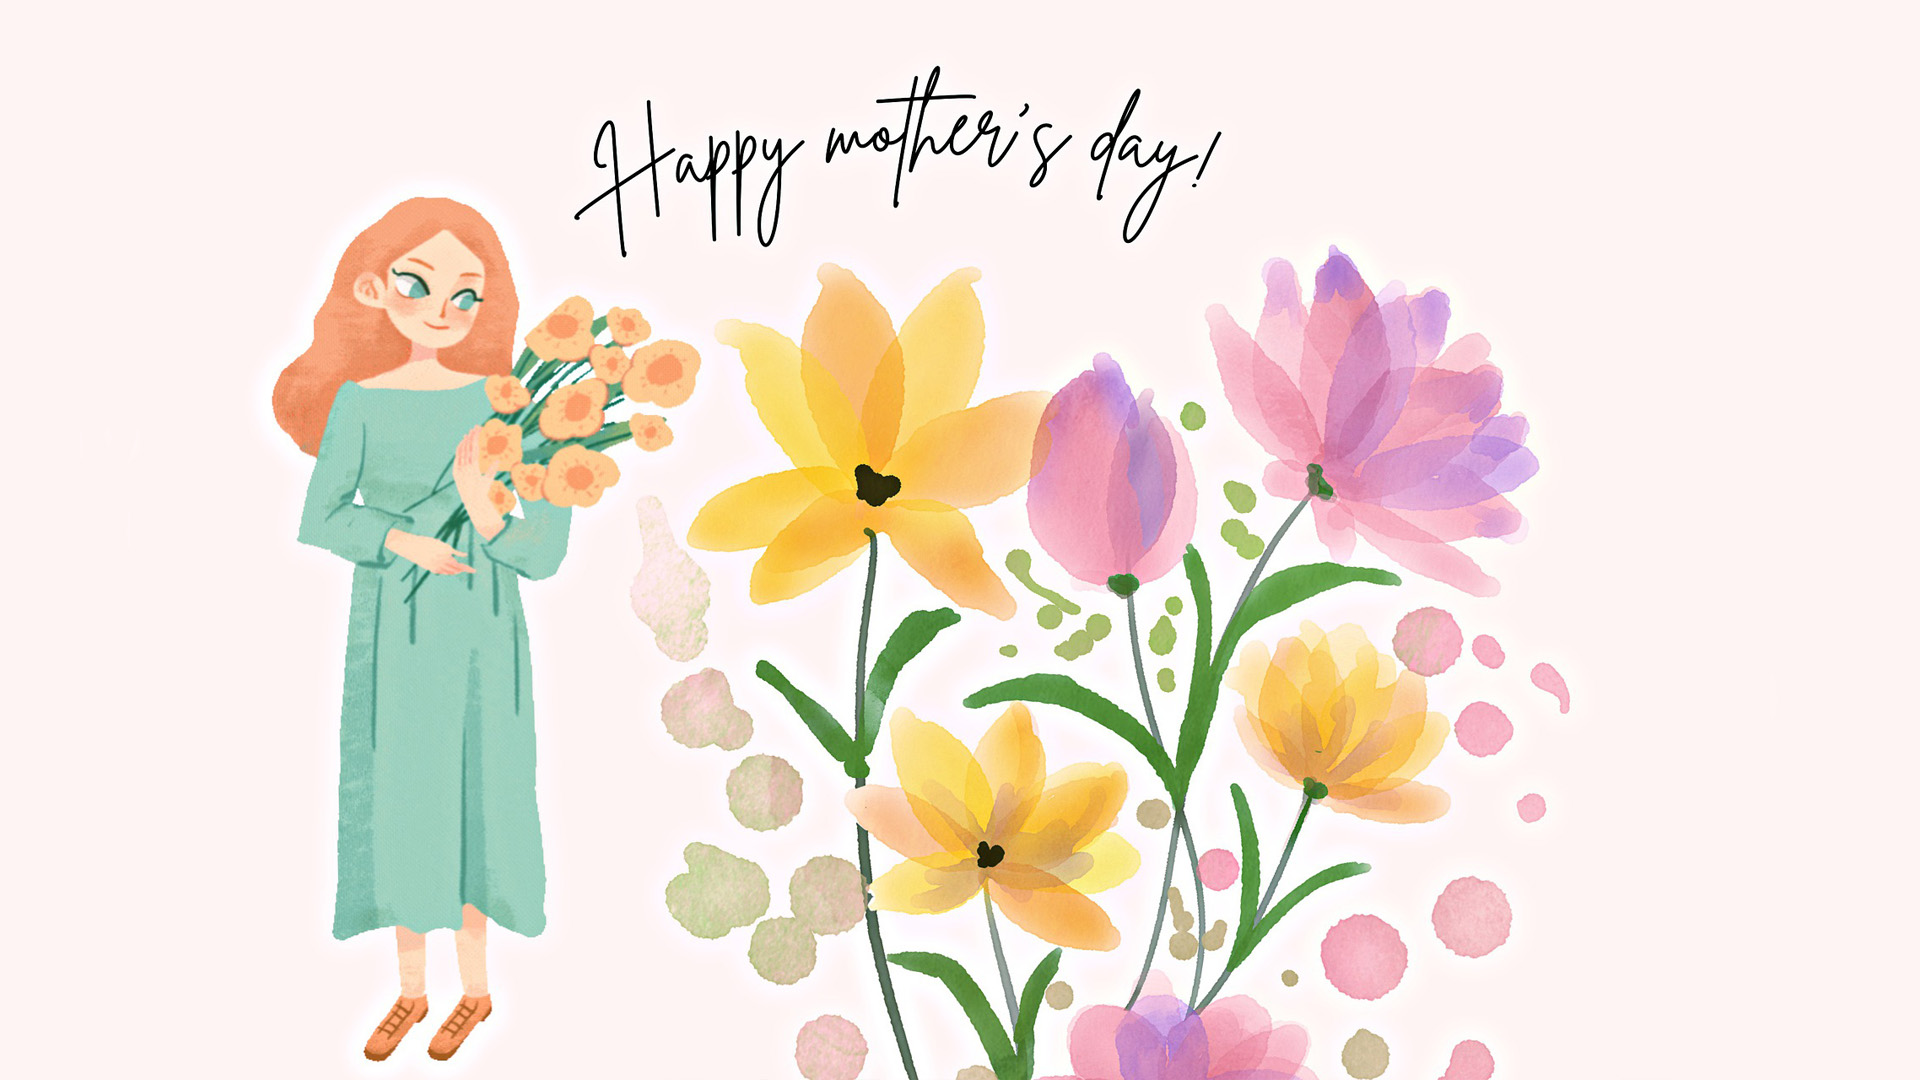 Light pink background with watercolor yellow, pink, purple, and green flowers make up the middle of the graphic a red haired woman is standing on the left side of the image in a mint green dress holding flowers. Happy Mother's Day is written across the top of the graphic in black script font.